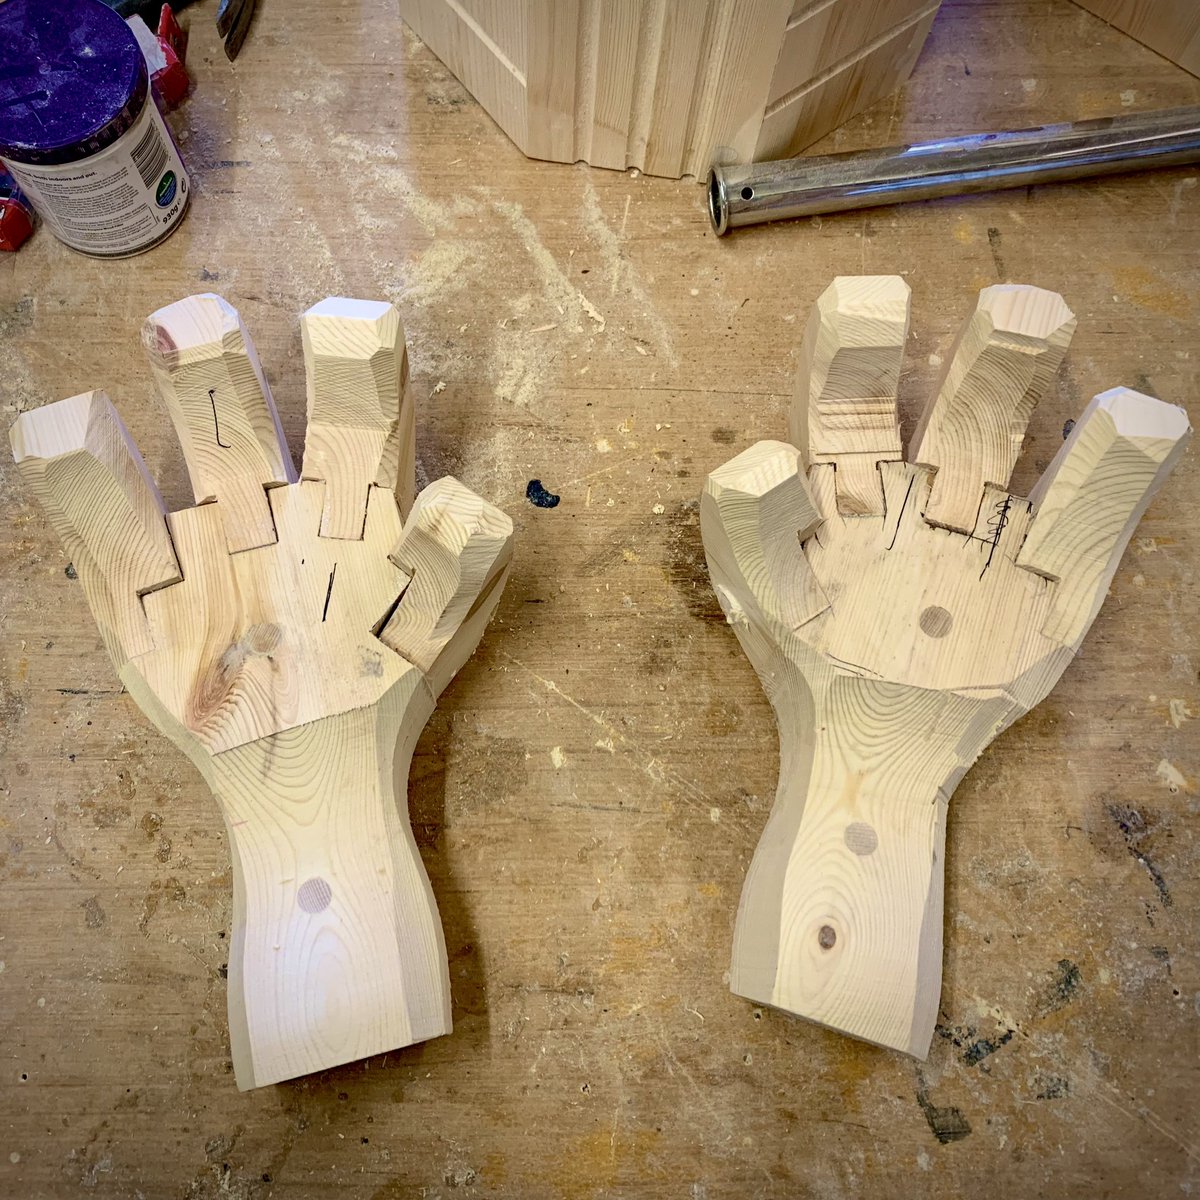 Prototype hands from #VR sculpted 3D print maquette- process images #wood #sculpting #reusedwood #carving